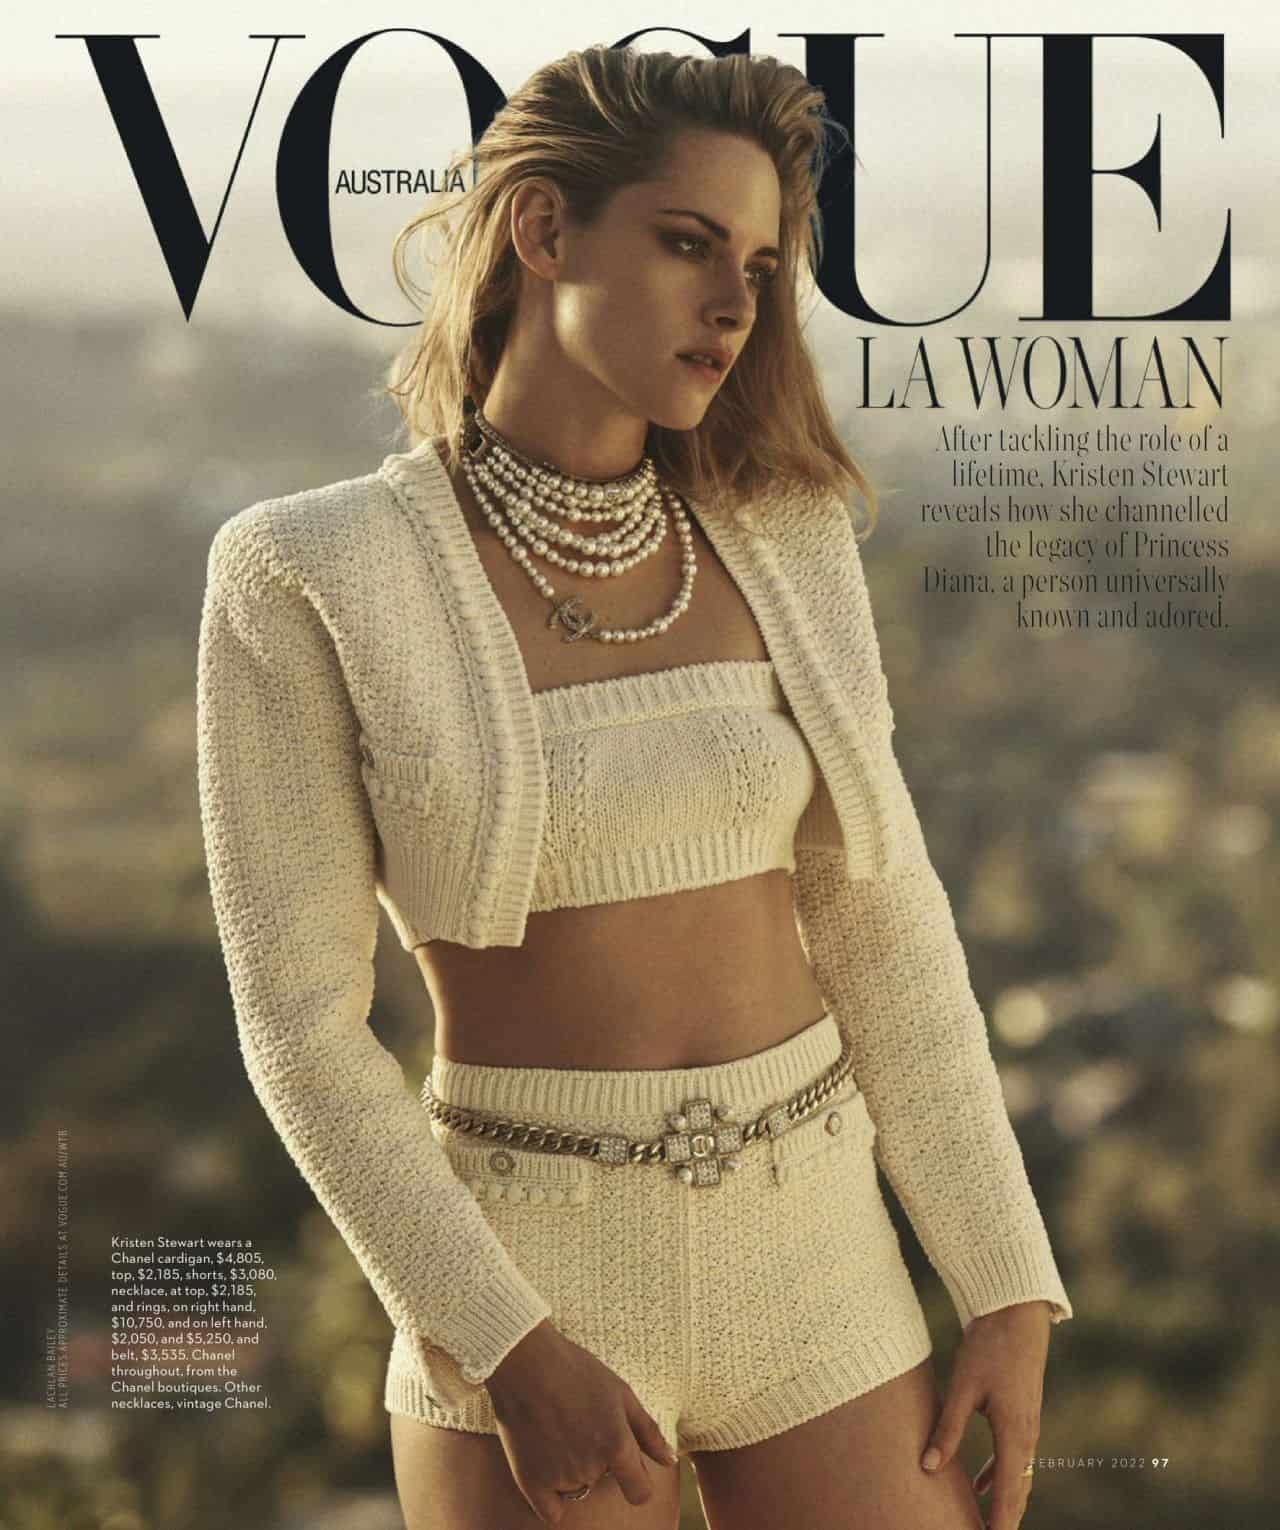 Kristen Stewart is the Cover Star of Vogue Australia February 2022 Issue